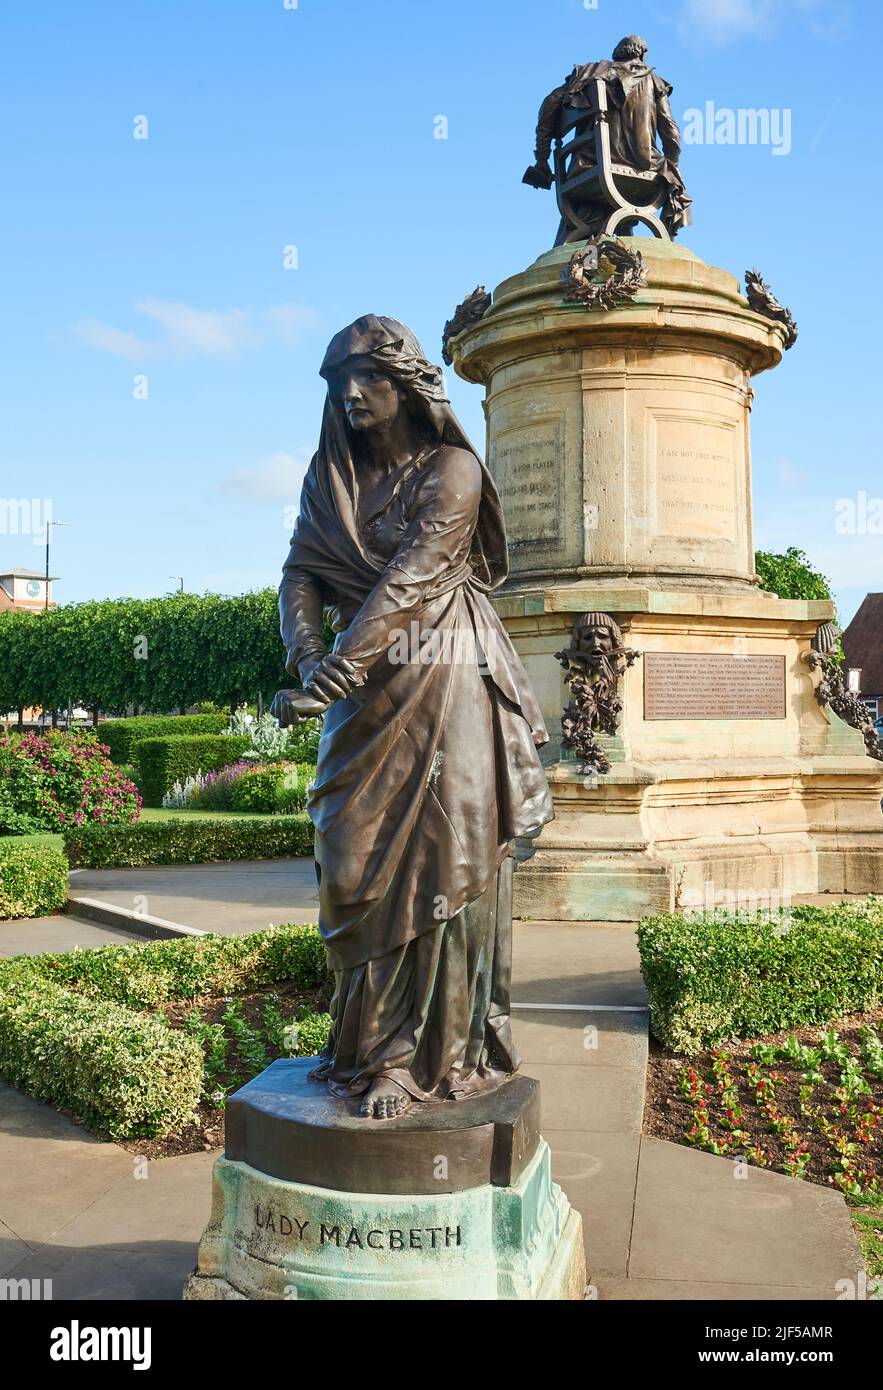 Gower Memorial statue in Bancroft Gardens, Stratford upon Avon, Warwickshire, with William Shakespeare sat overlooking key characters from his plays Stock Photo